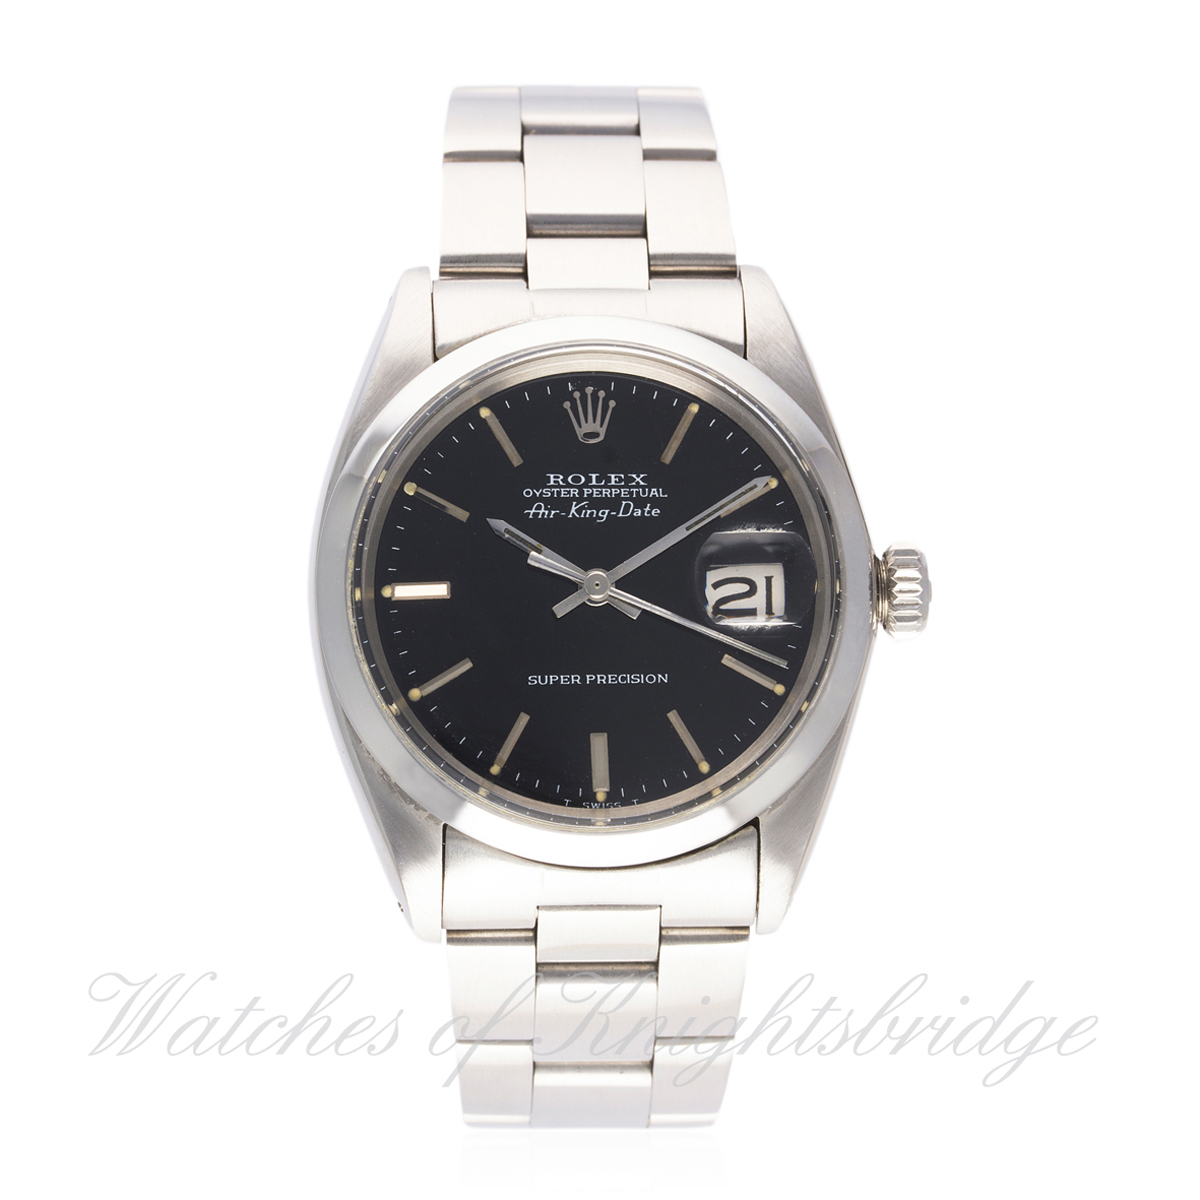 A GENTLEMAN'S STAINLESS STEEL ROLEX OYSTER PERPETUAL AIR KING DATE SUPER PRECISION BRACELET WATCH